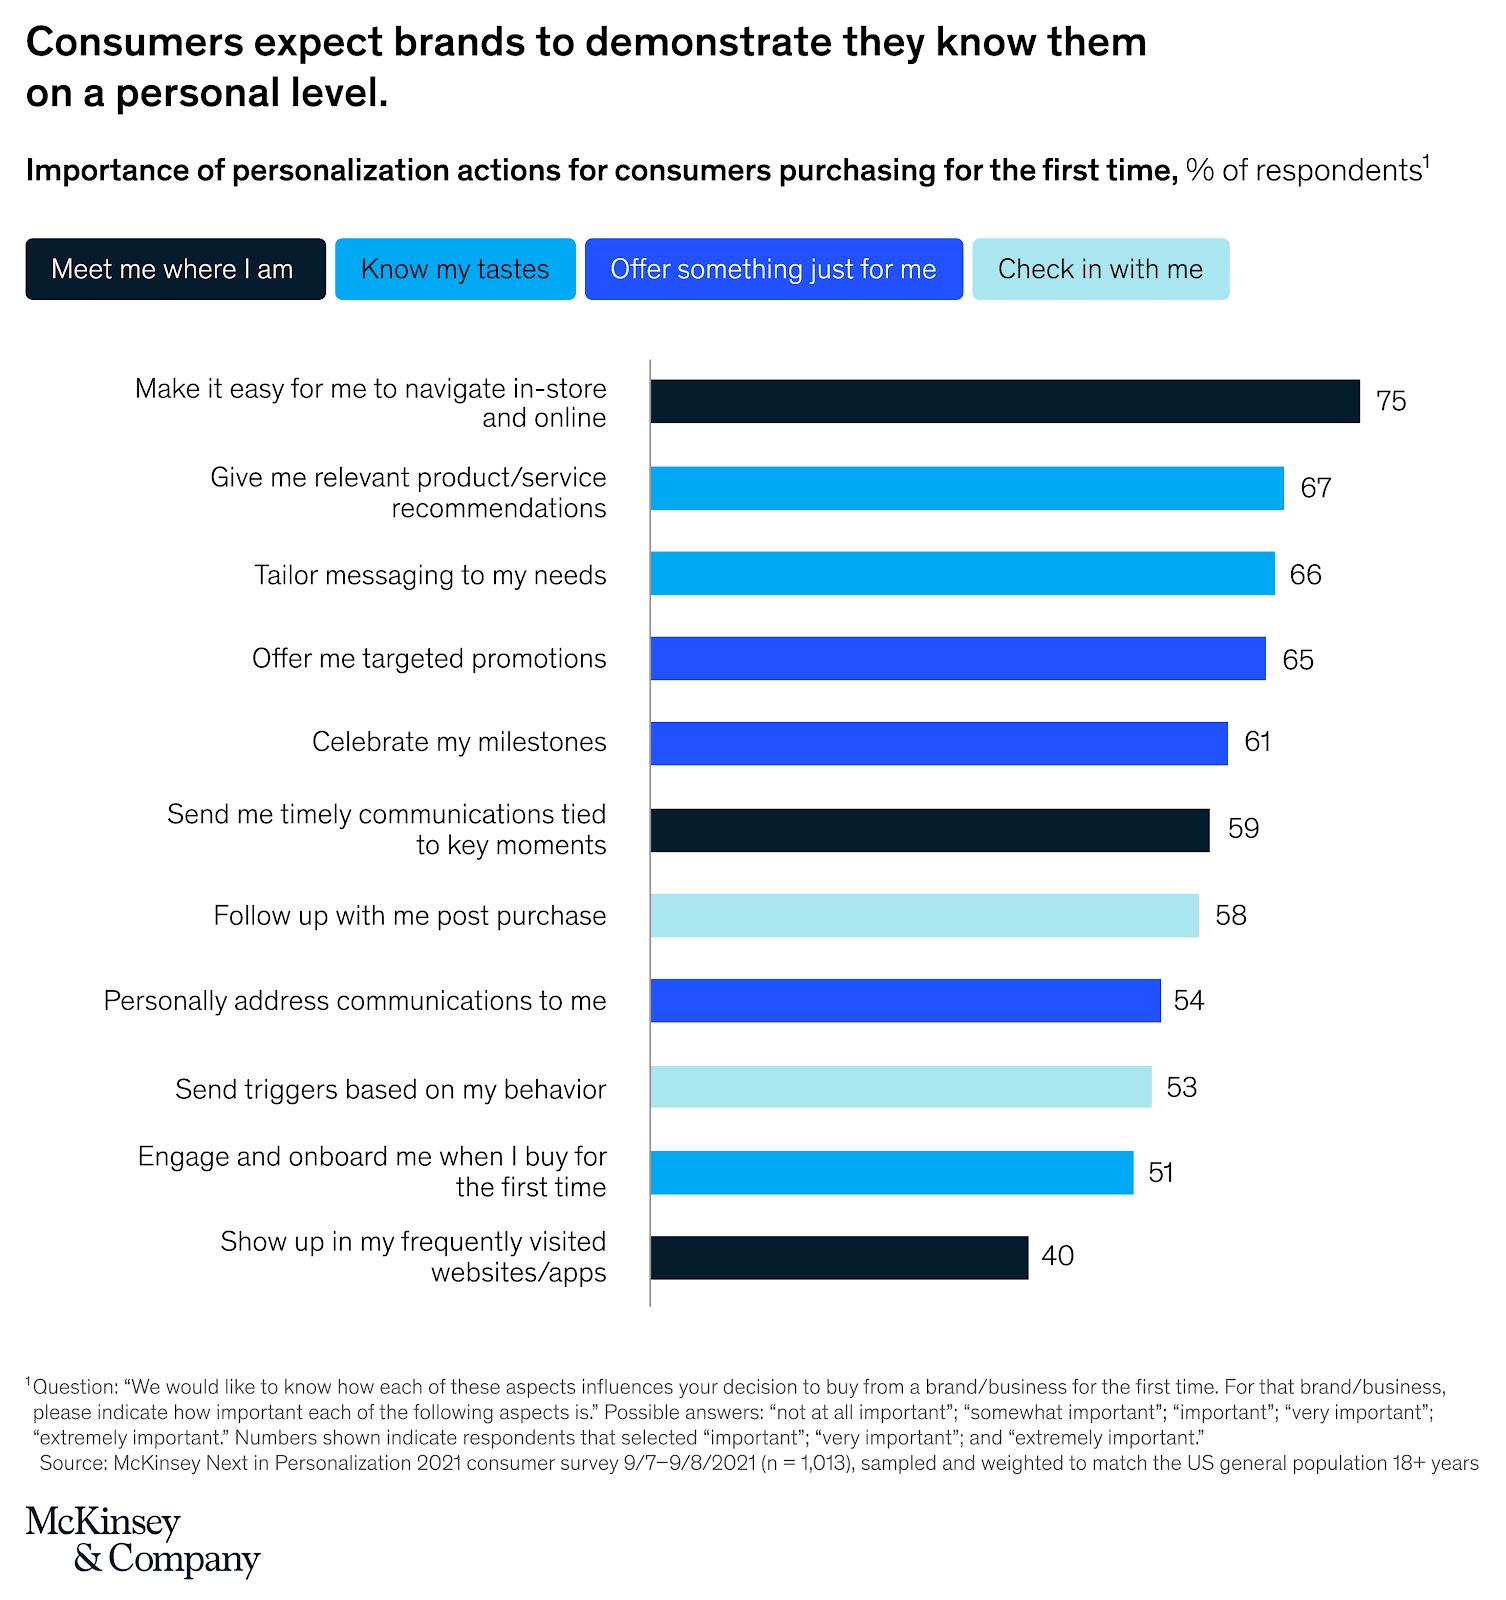 McKinsey's survey results on consumers expecting brands to demonstrate they know them on a personal level